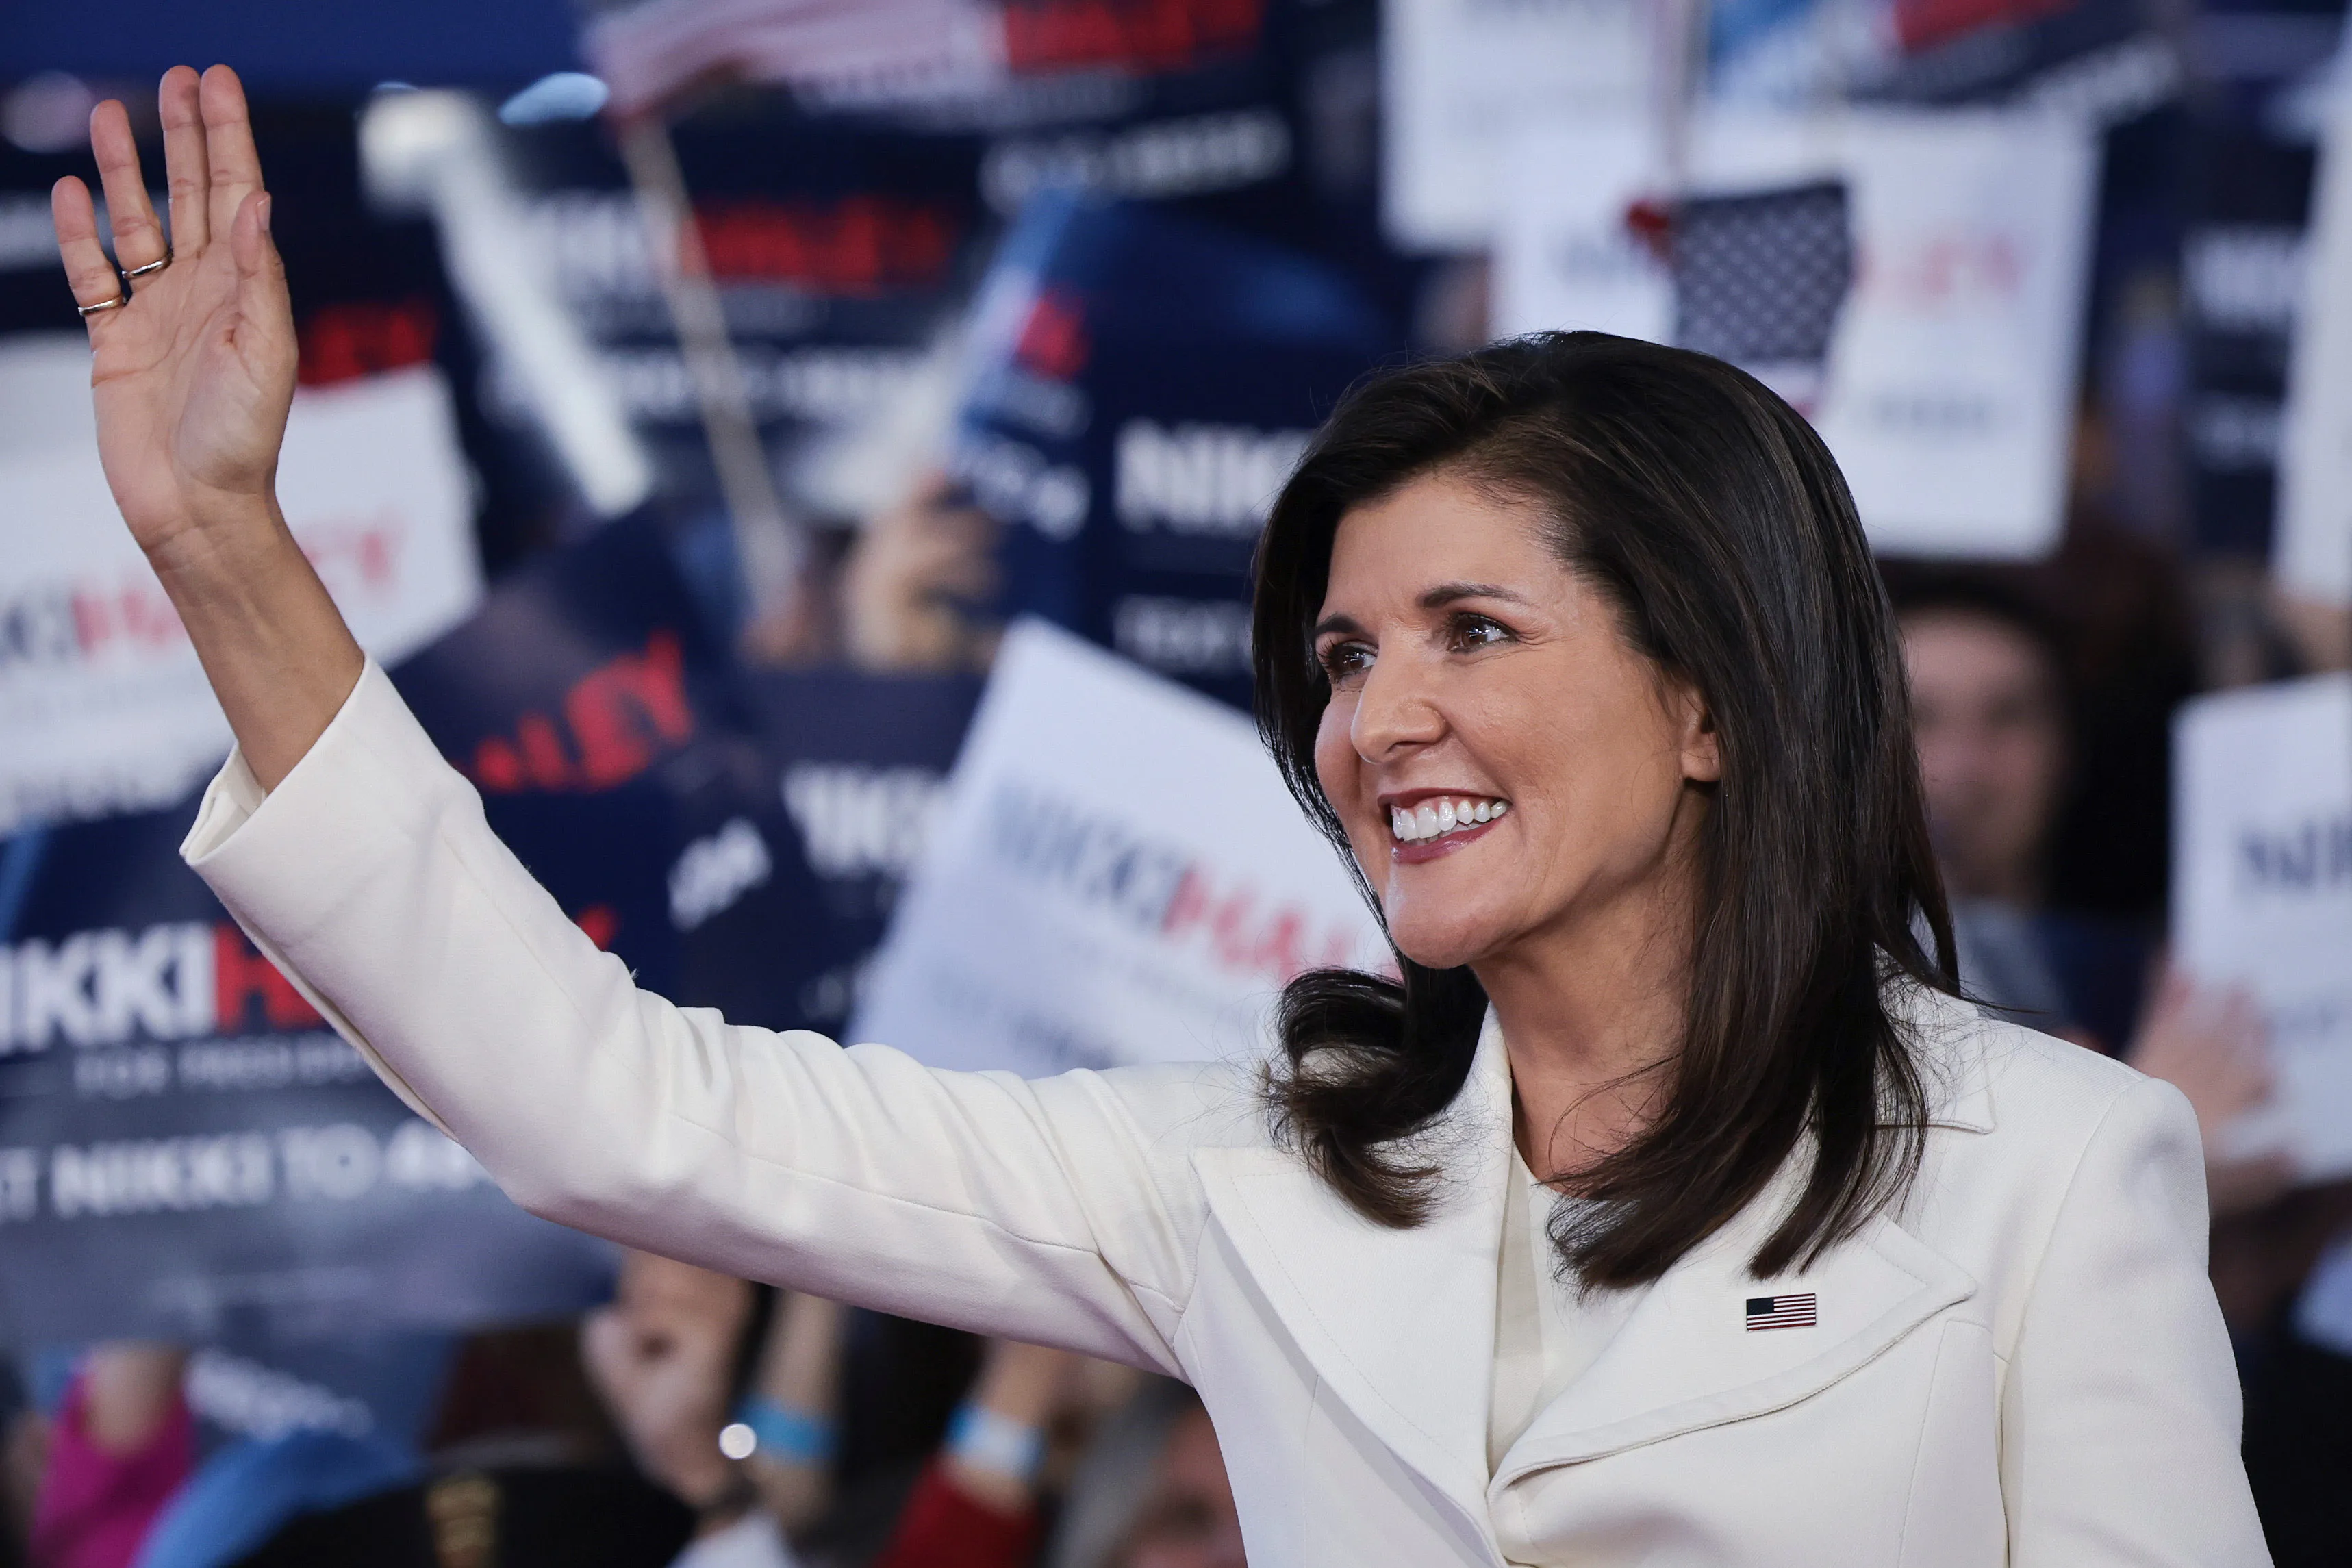 Nikki Haley becomes the first woman to win a Republican primary in US history